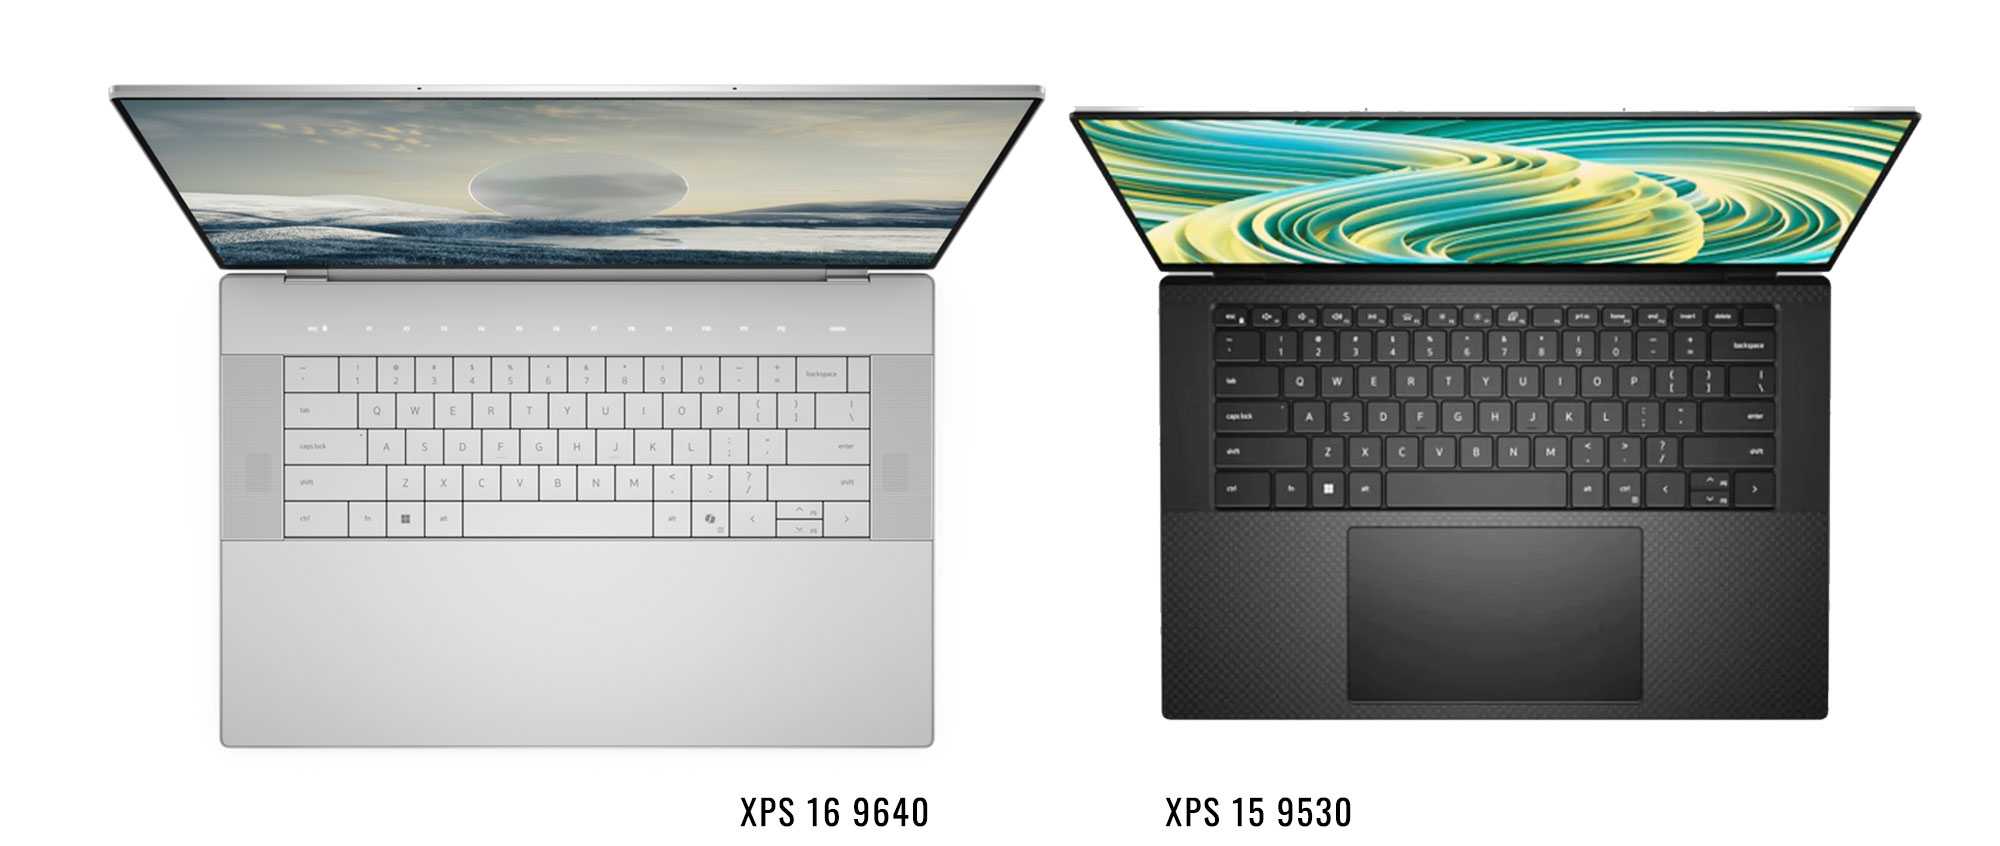 dell xps 16 keyboards